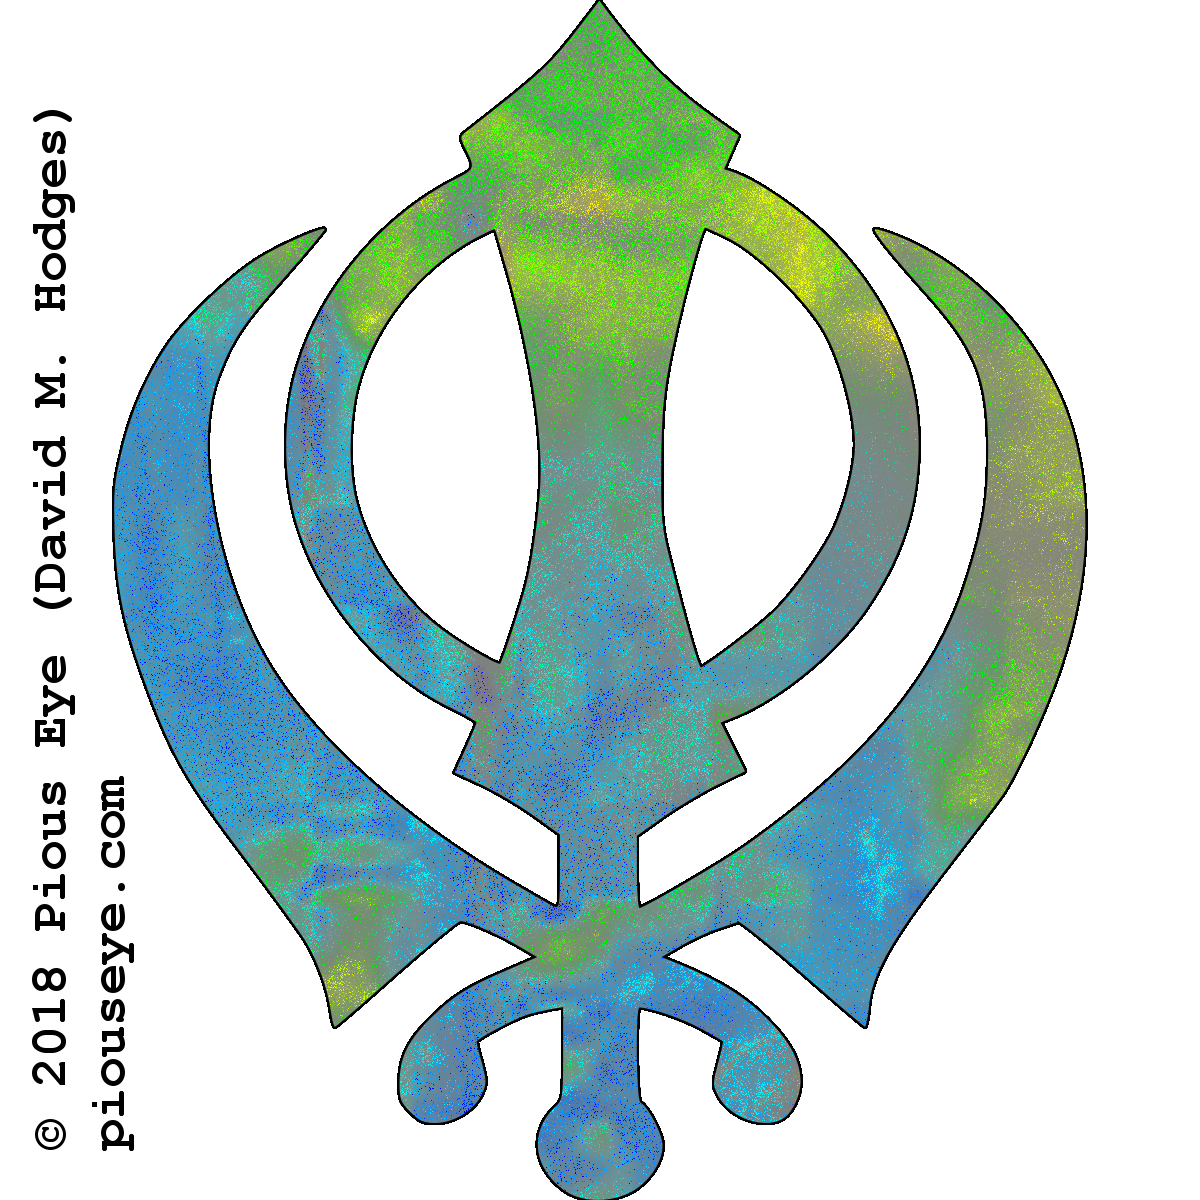 Sikh Khanda symbol with nature-inspired color pattern